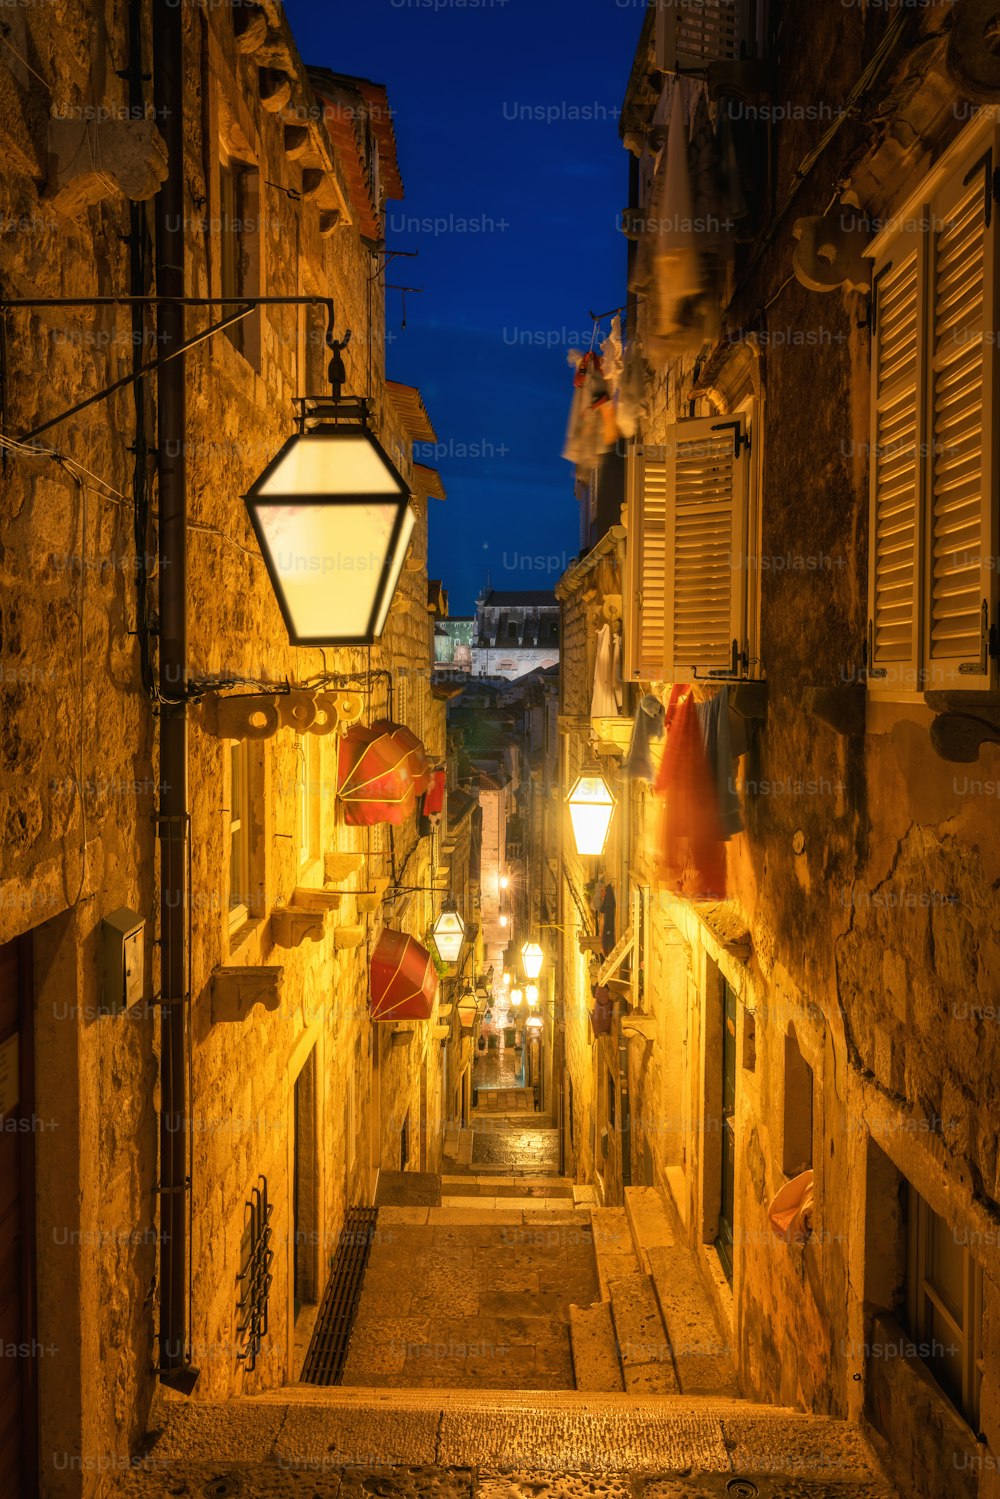 Famous narrow alley of Dubrovnik old town in Croatia at night - Prominent travel destination of Croatia. Dubrovnik old town was listed as UNESCO World Heritage Sites in 1979.